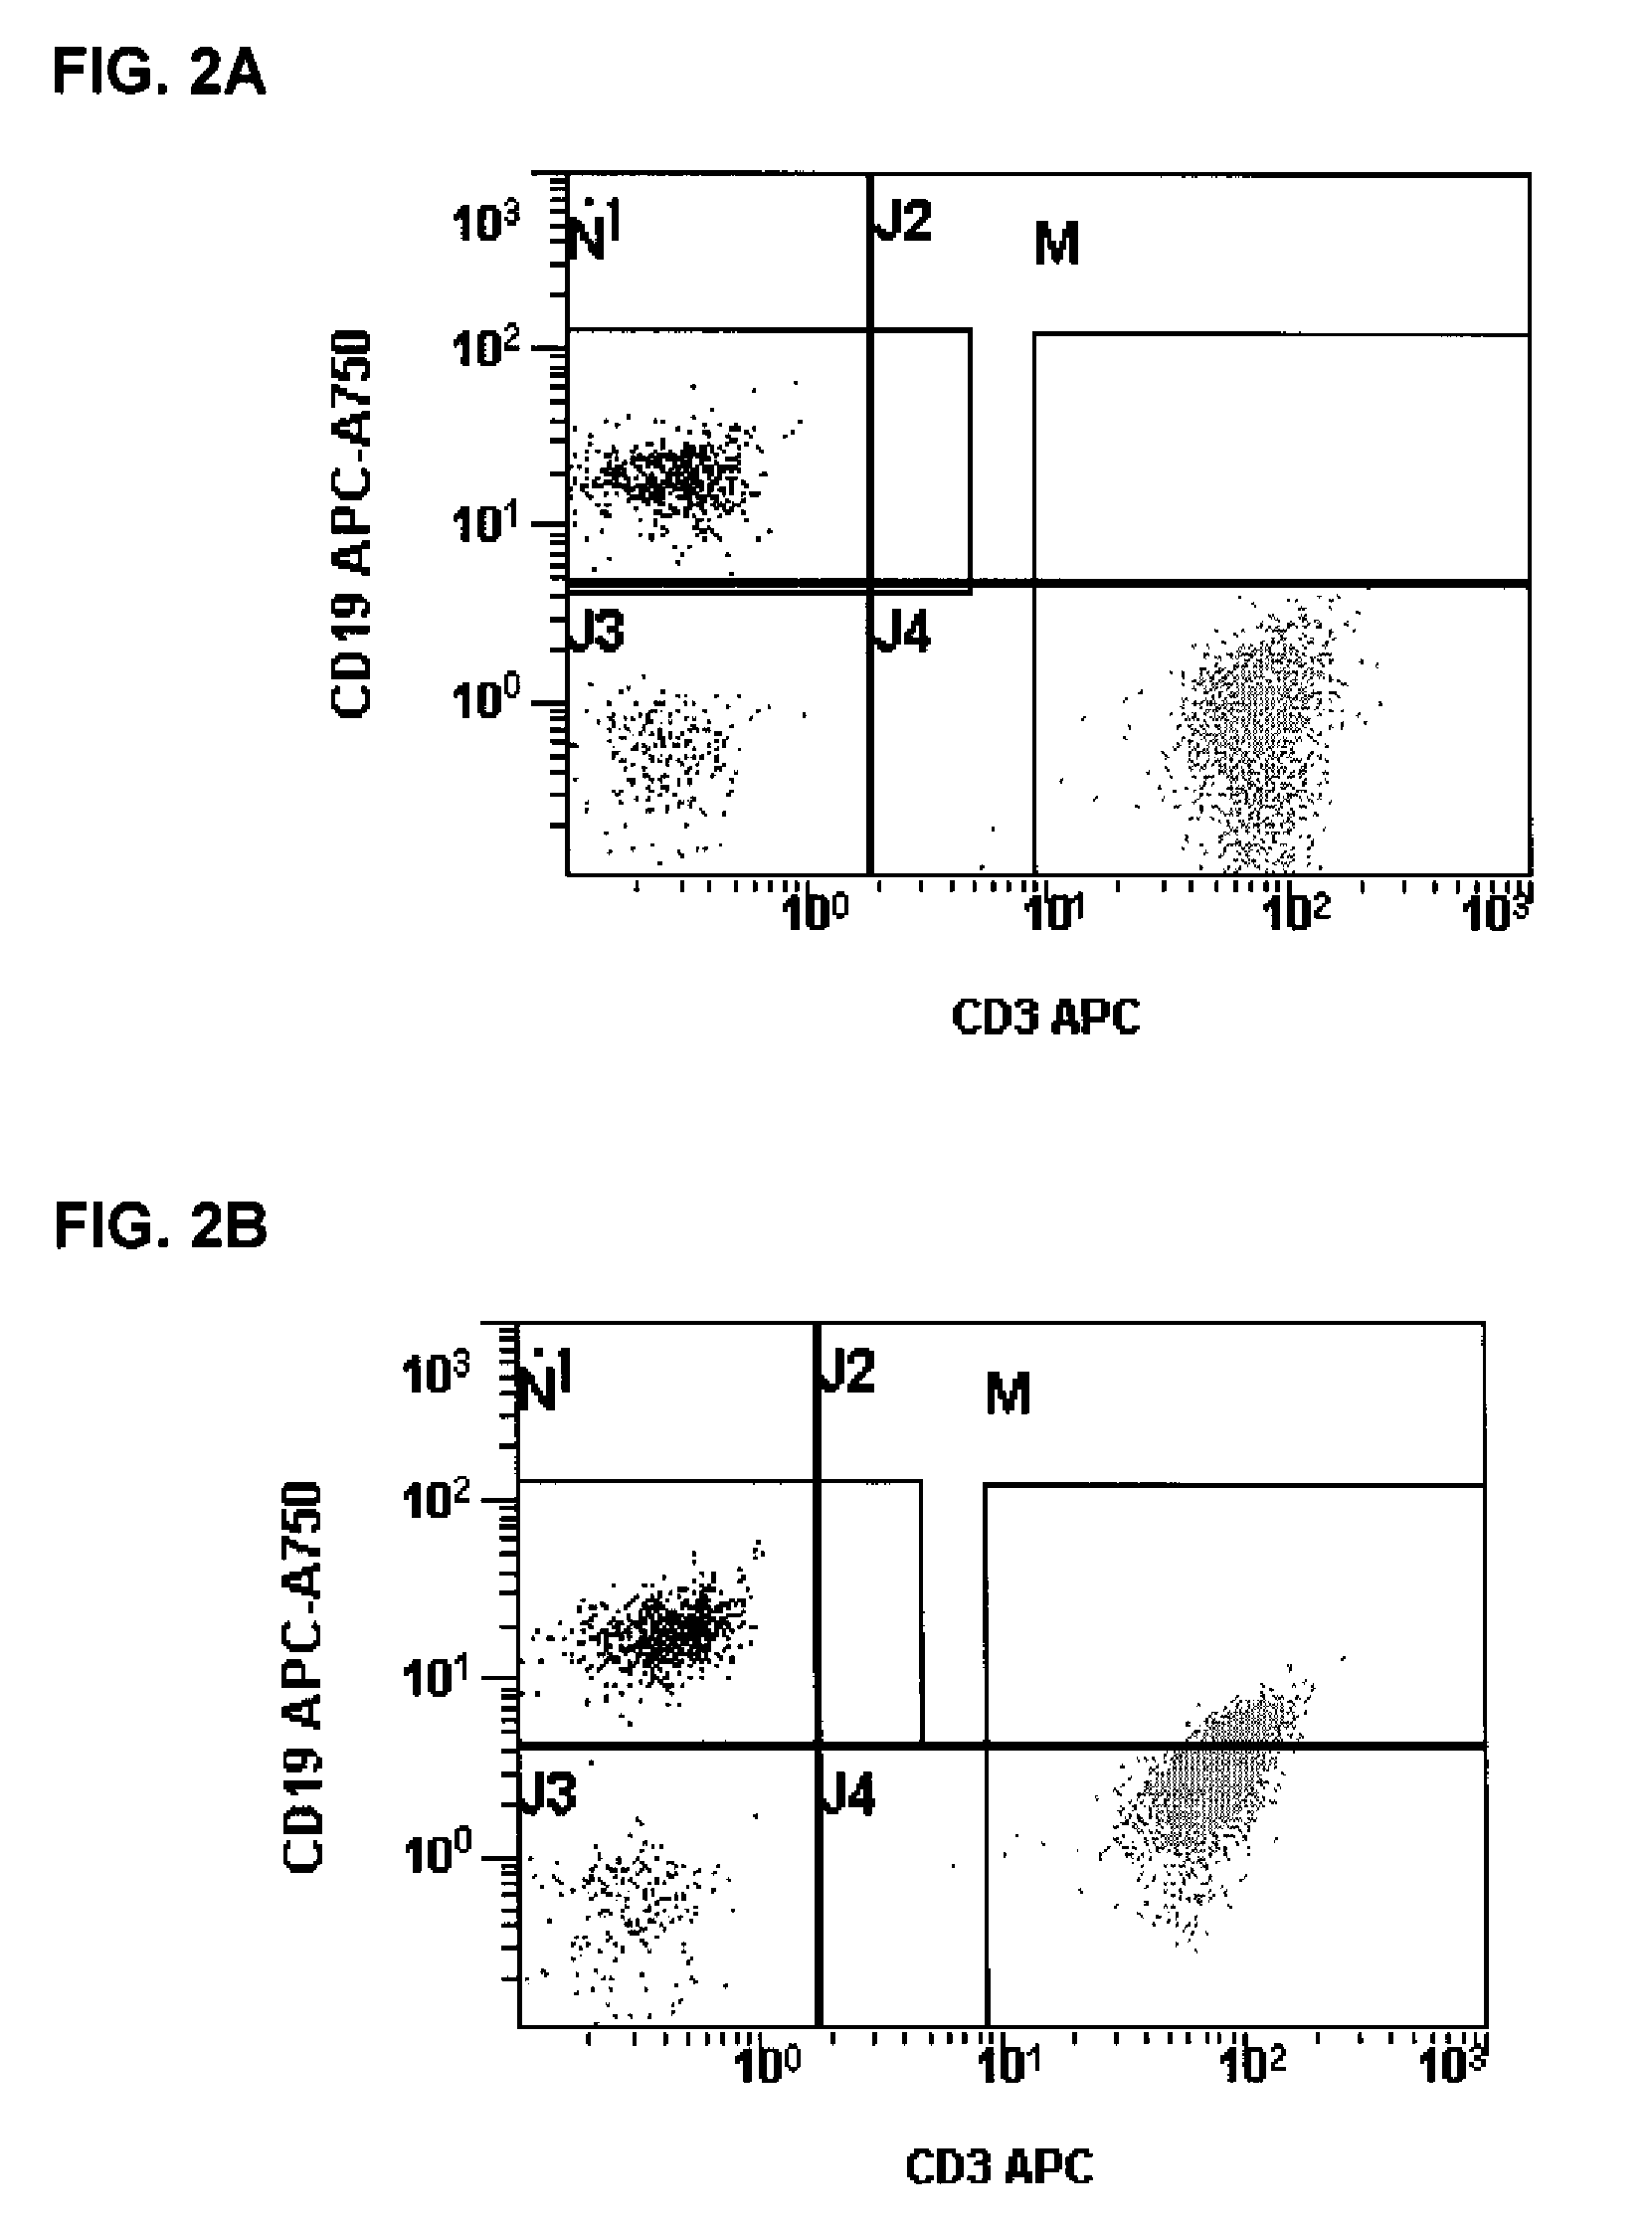 Multicolor flow cytometry compositions containing unconjugated phycobiliproteins